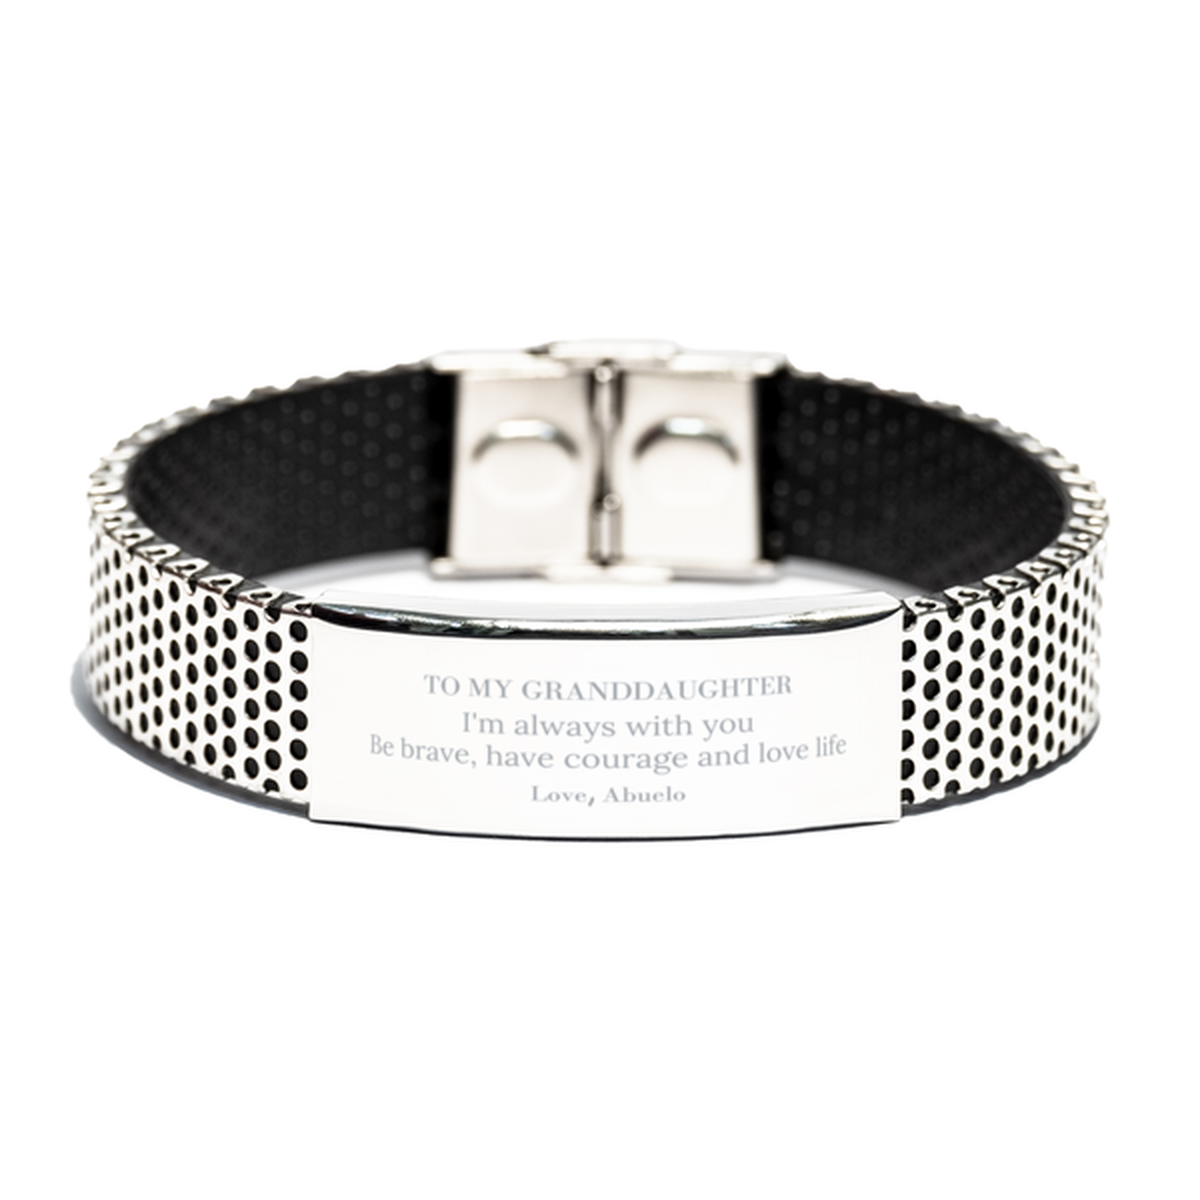 To My Granddaughter Gifts from Abuelo, Unique Stainless Steel Bracelet Inspirational Christmas Birthday Graduation Gifts for Granddaughter I'm always with you. Be brave, have courage and love life. Love, Abuelo